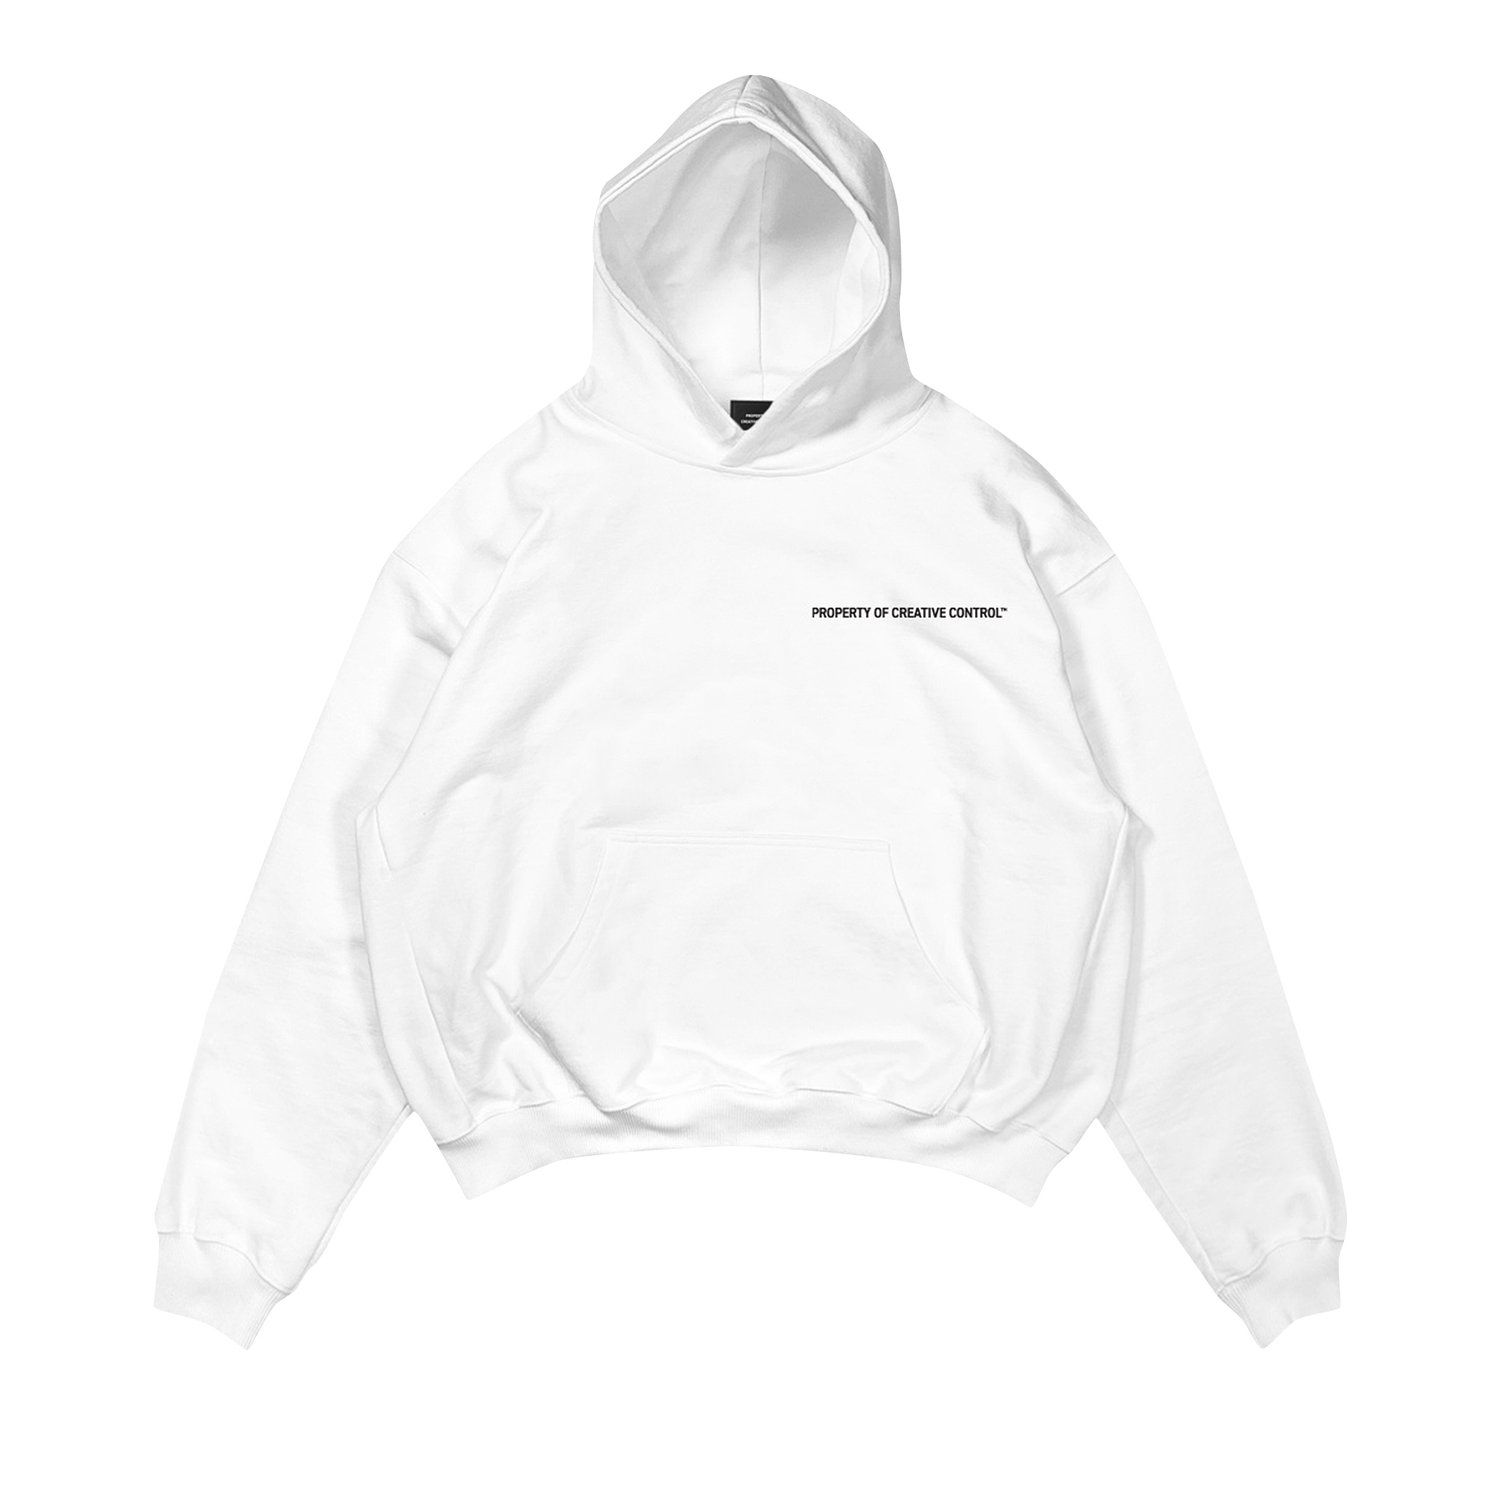 Buy Kanye West x Creative Control Entertainment Jeen-Yuhs 3D Hoodie ...